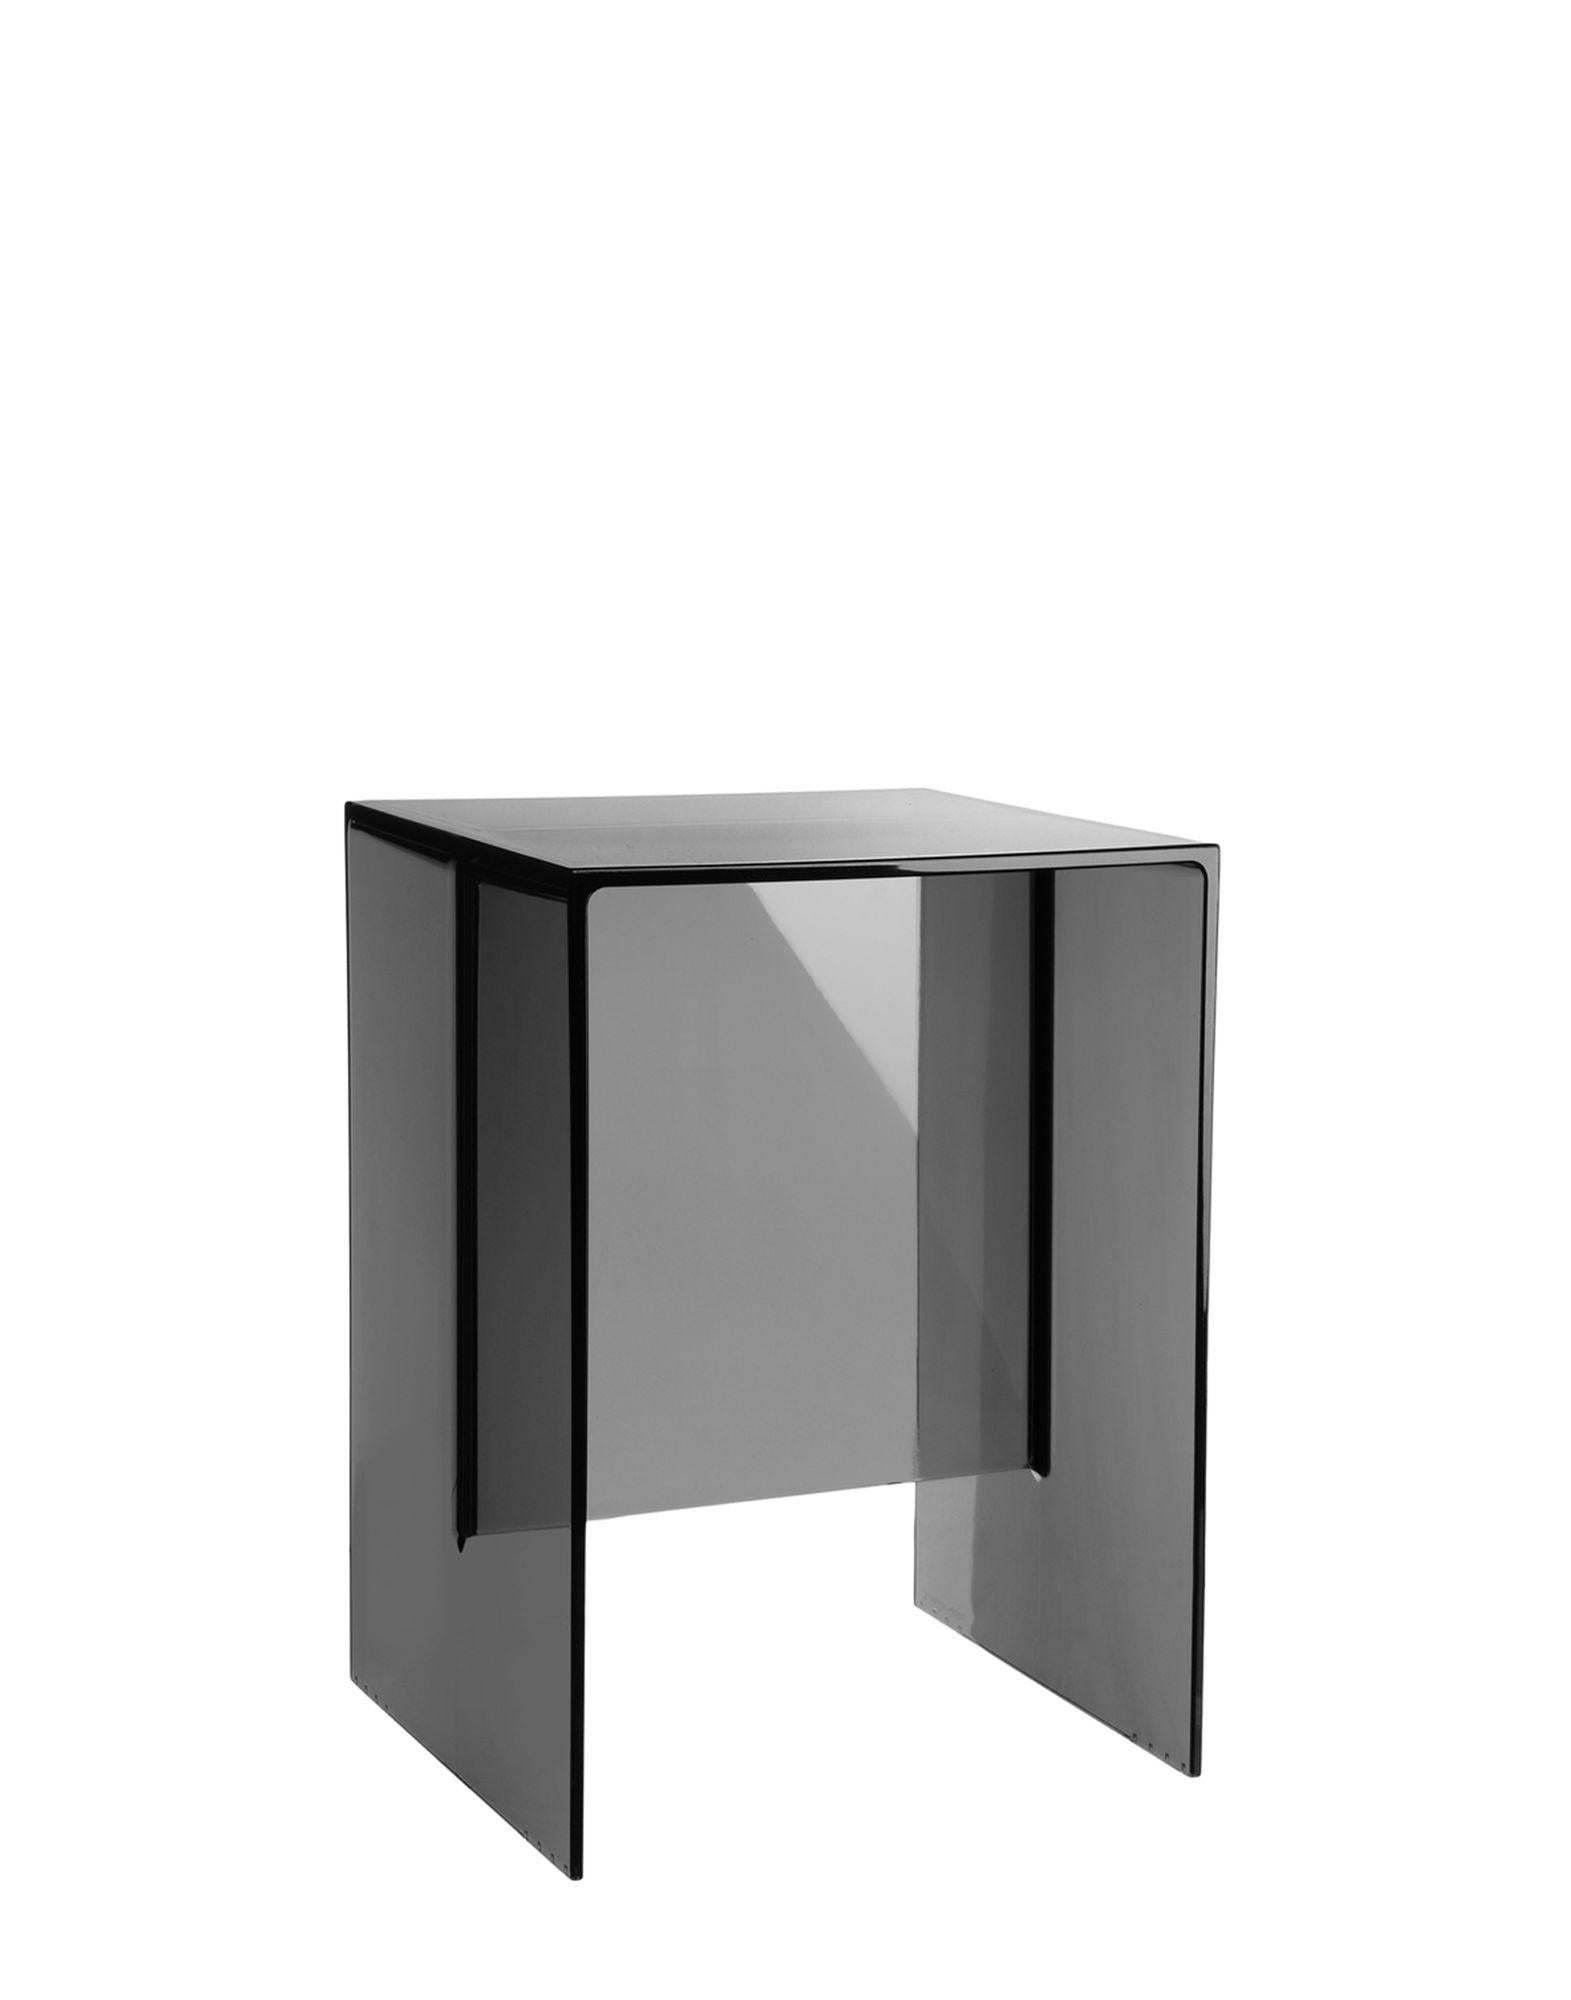 Monolithic stool or table made of transparent plastic, with a thickness that emphasises its geometric purity. A practical, functional and versatile accessory, for use anywhere in the home.

Dimensions: Height 18.5 in.; width 13 in.; depth 10.75